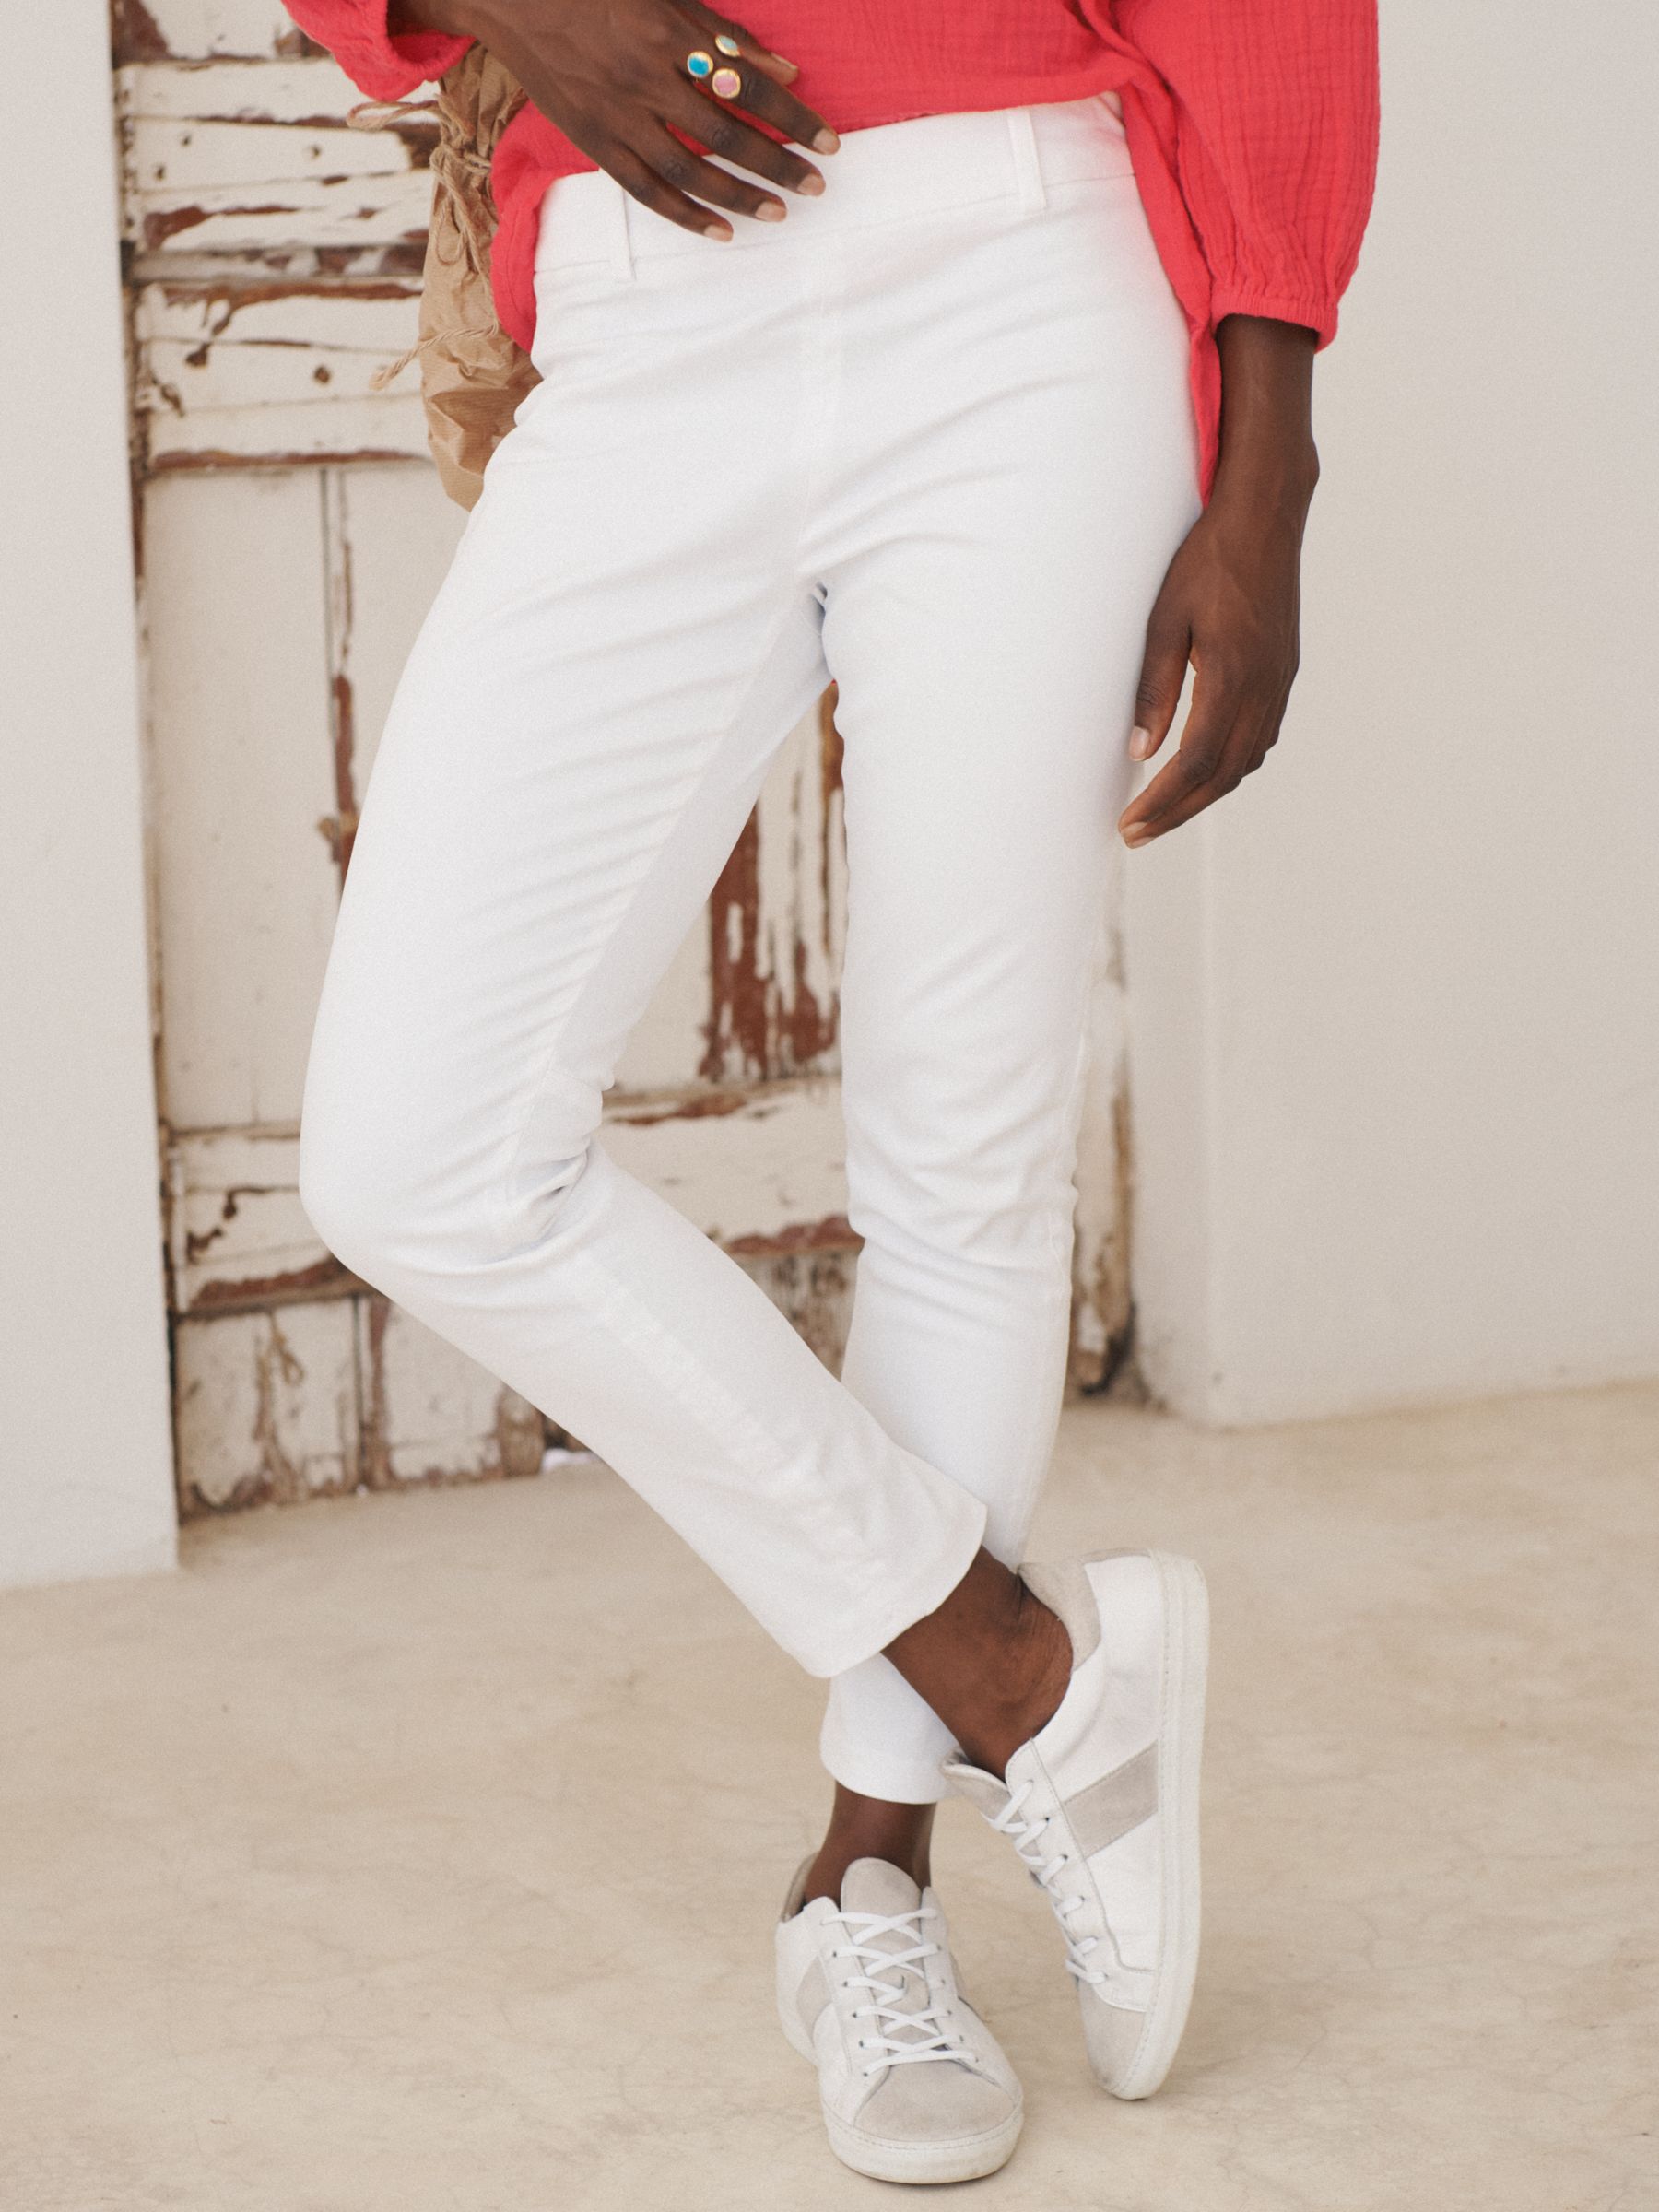 Buy NRBY Colette Cotton Blend Trousers, White Online at johnlewis.com